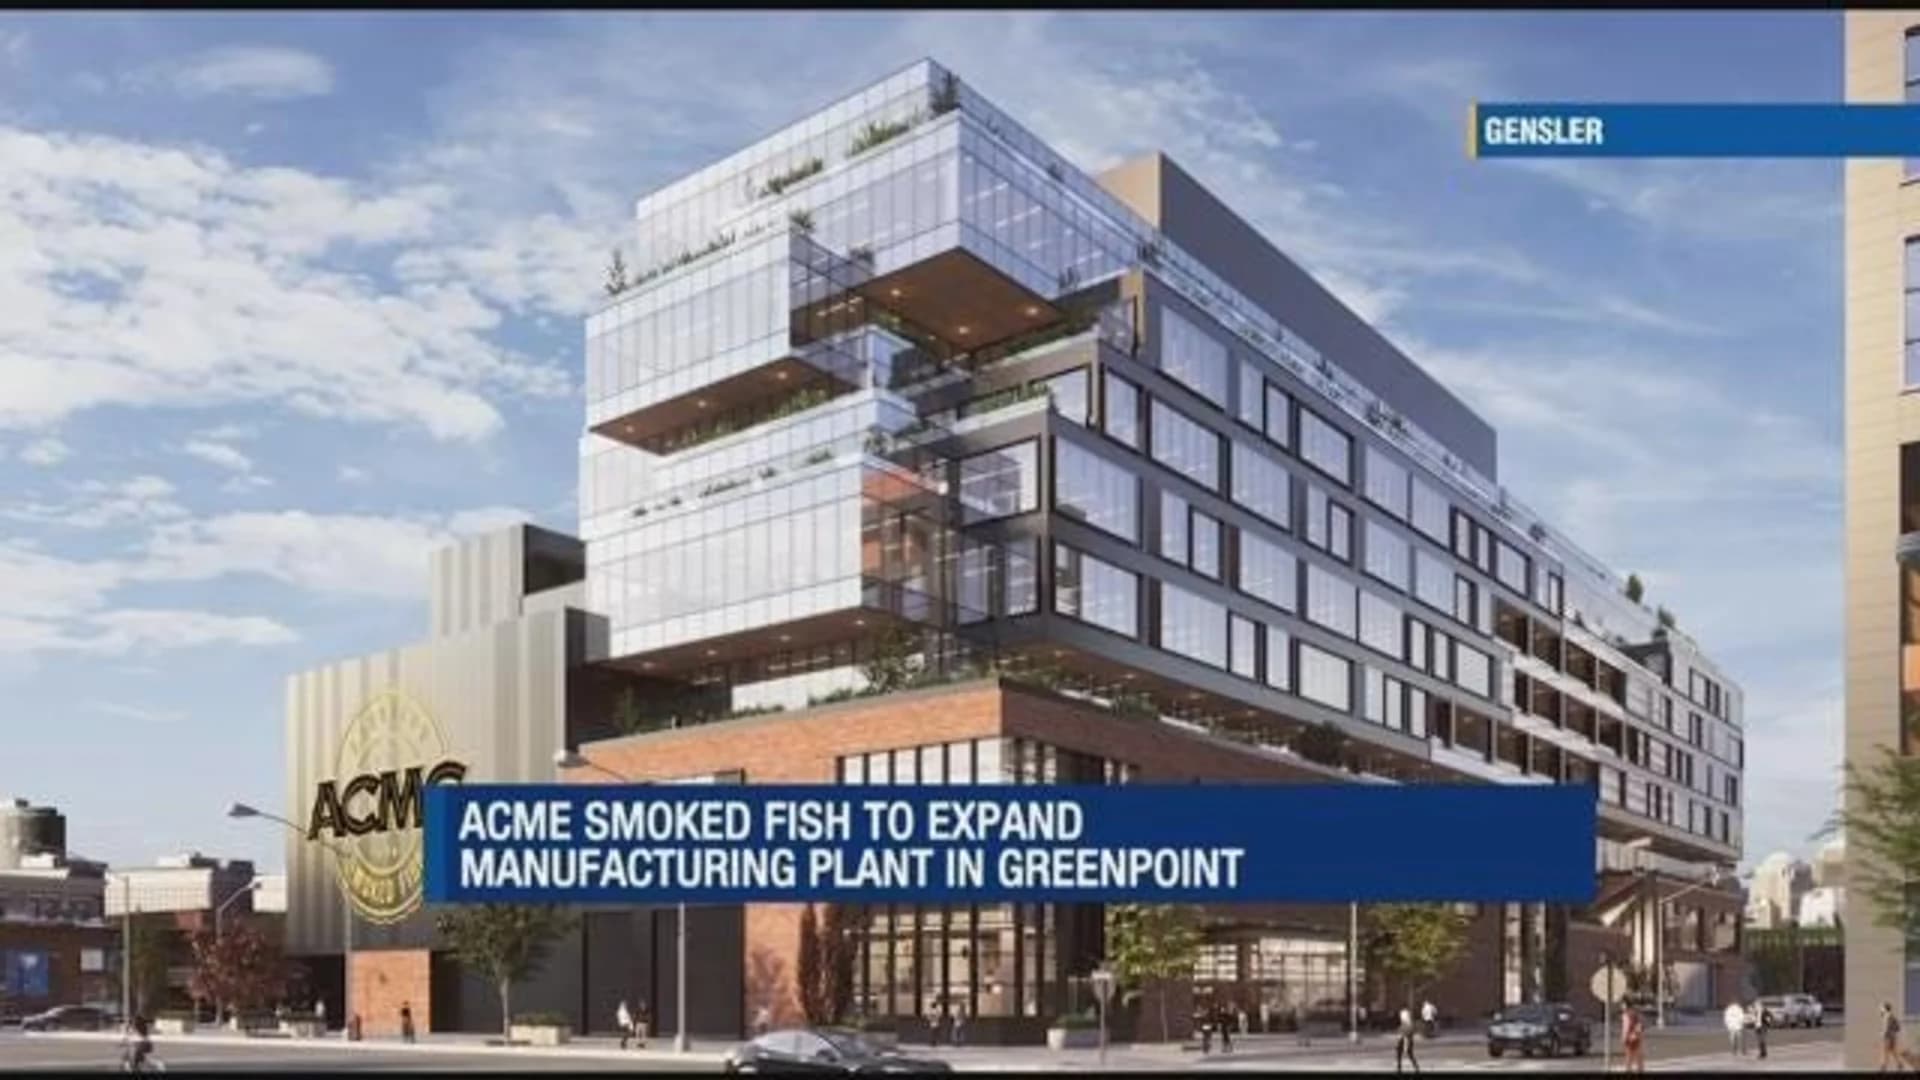 Brooklyn's Acme Smoked Fish prepares to expand